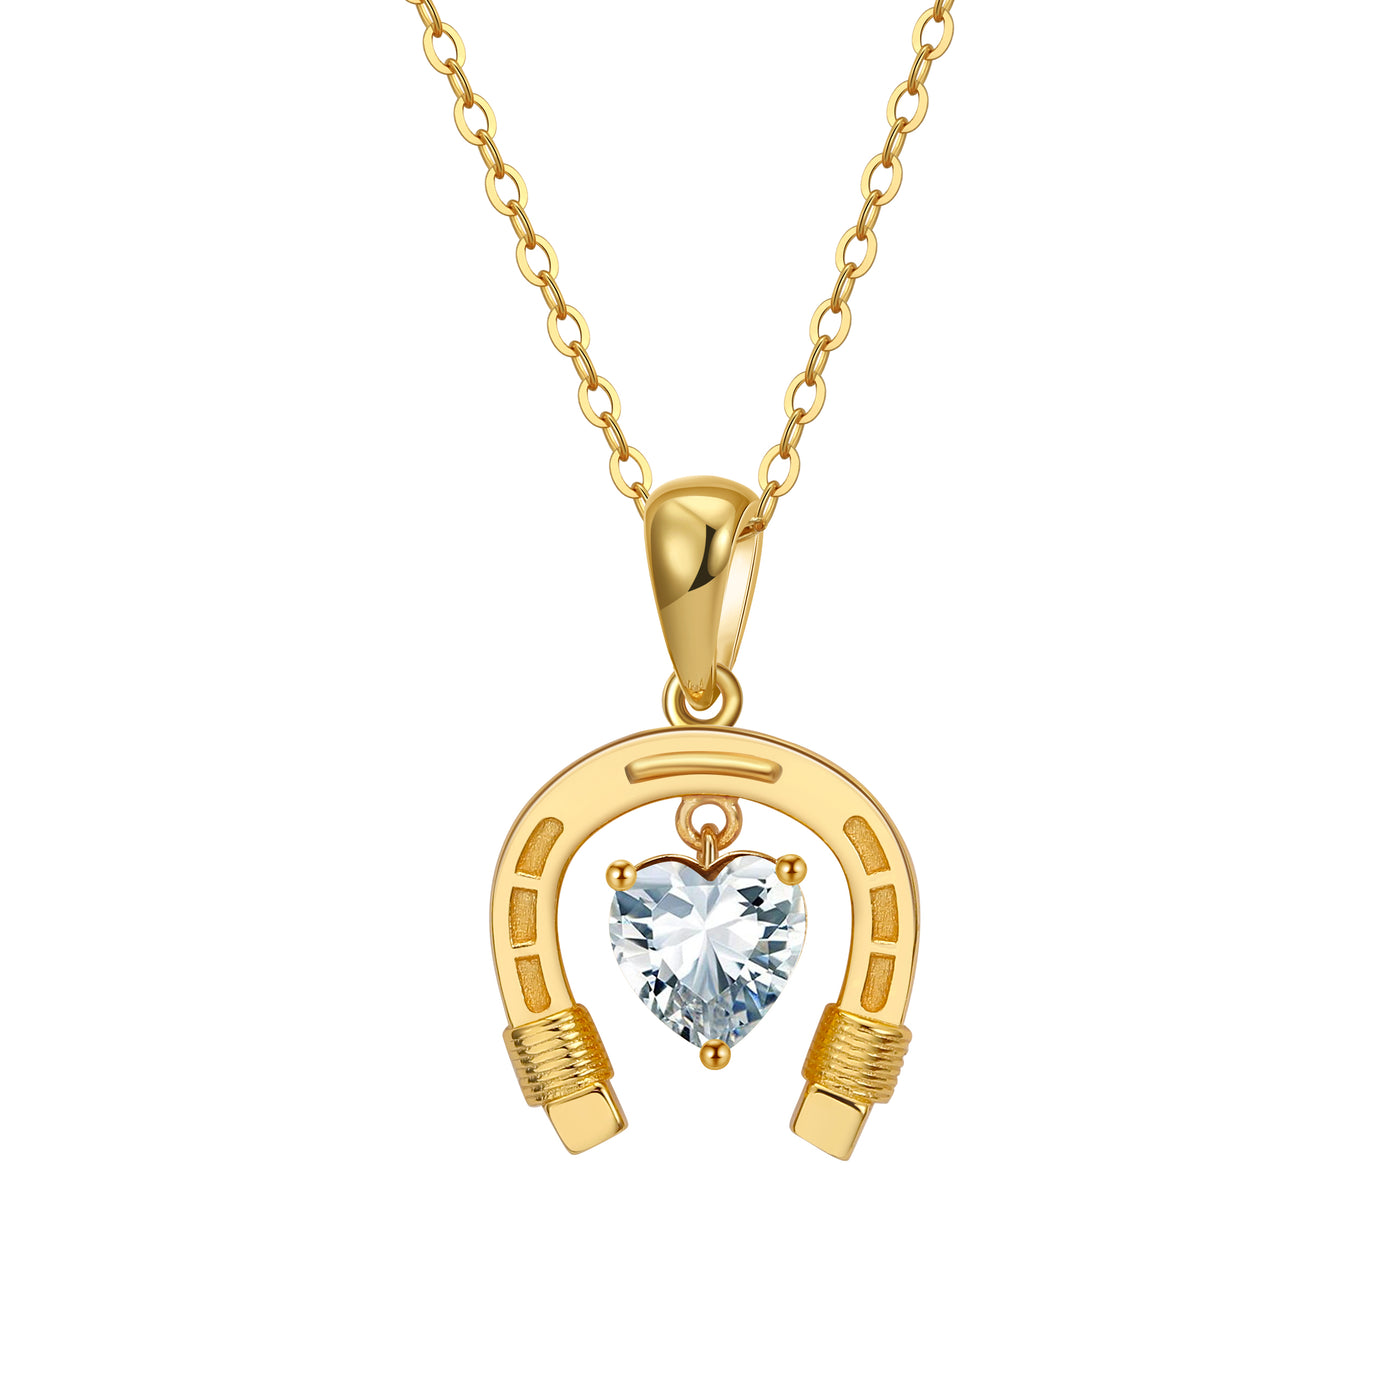 April Clear Horseshoe Heart Birthstone Necklace Gold with Cubic Zirconia | Dark Horse Collection by Everwild Desings